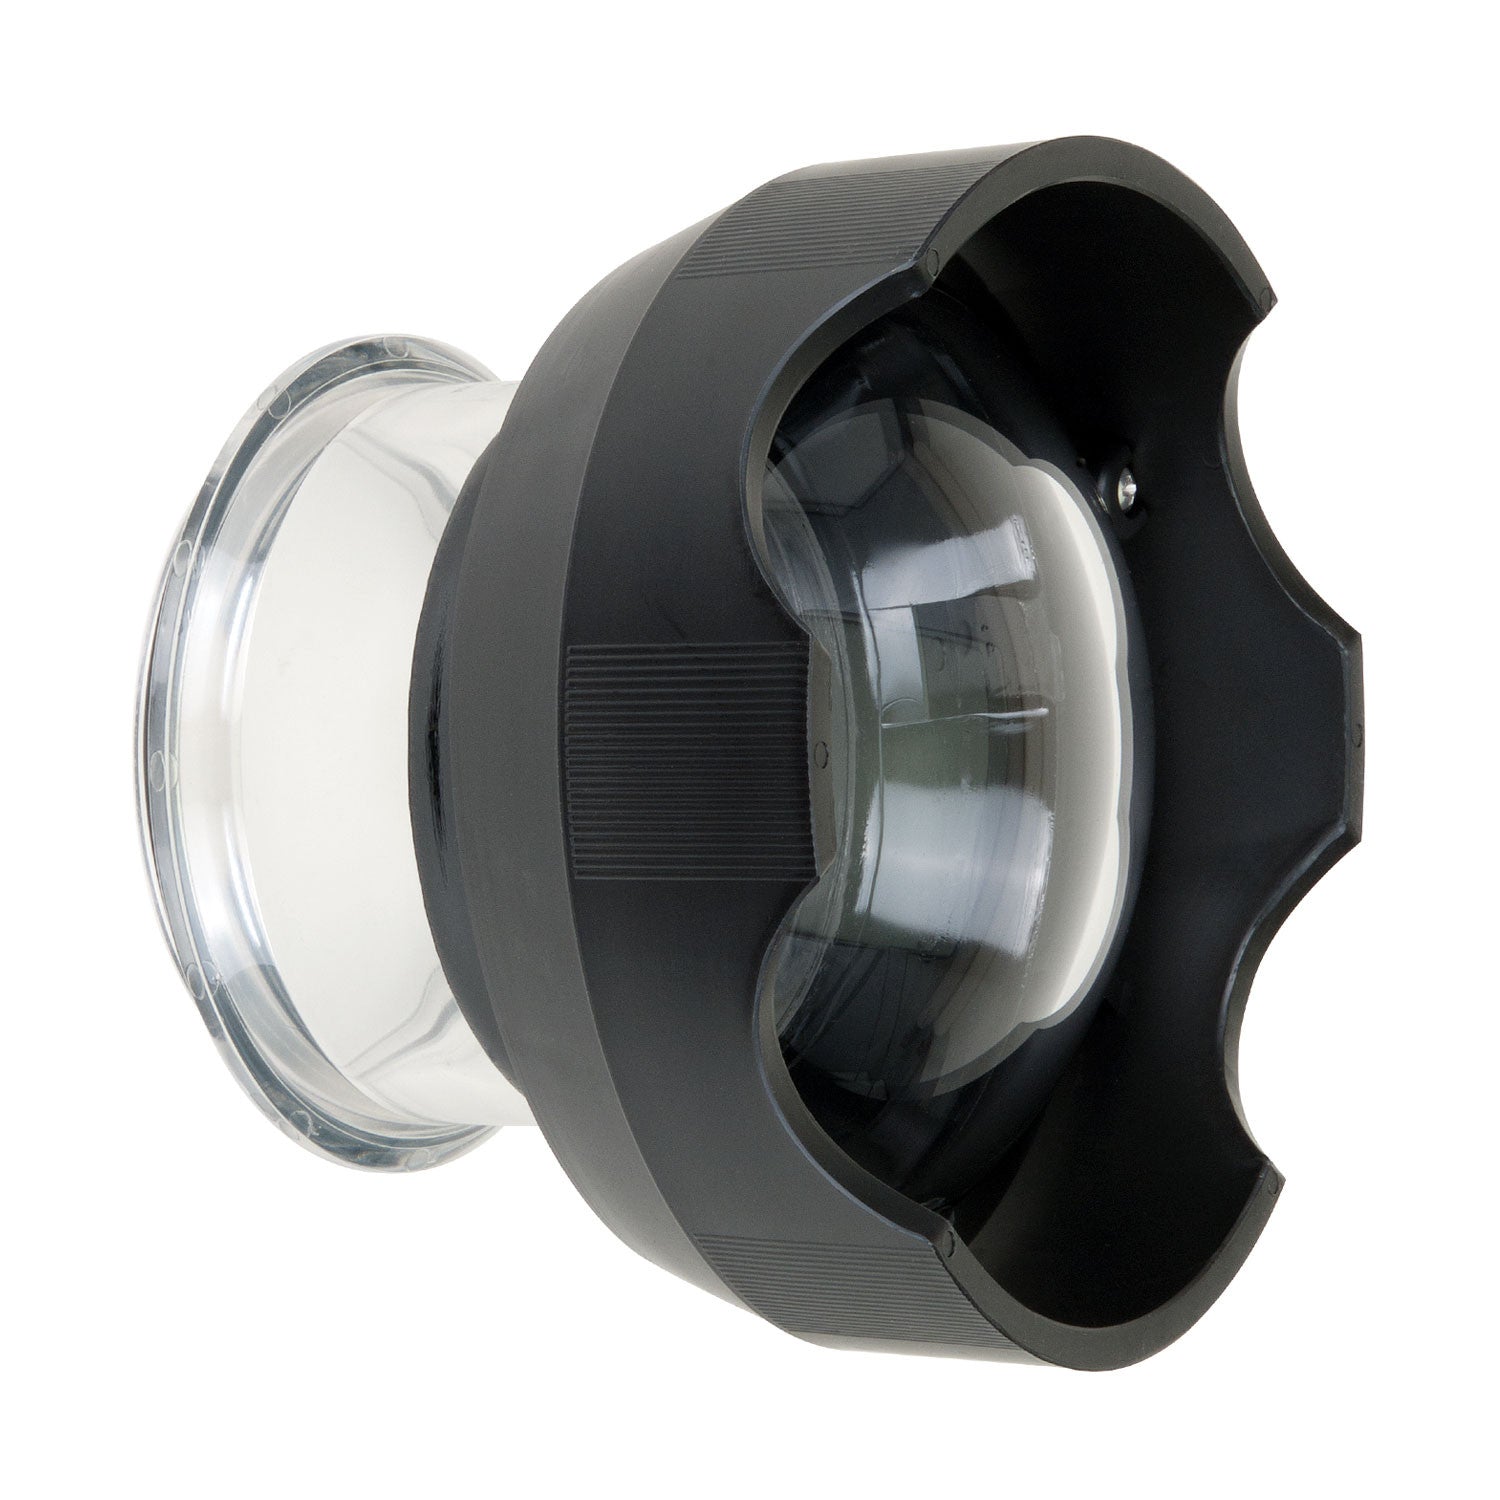 FL 6 inch Dome for Lenses Up To 4.5 Inches